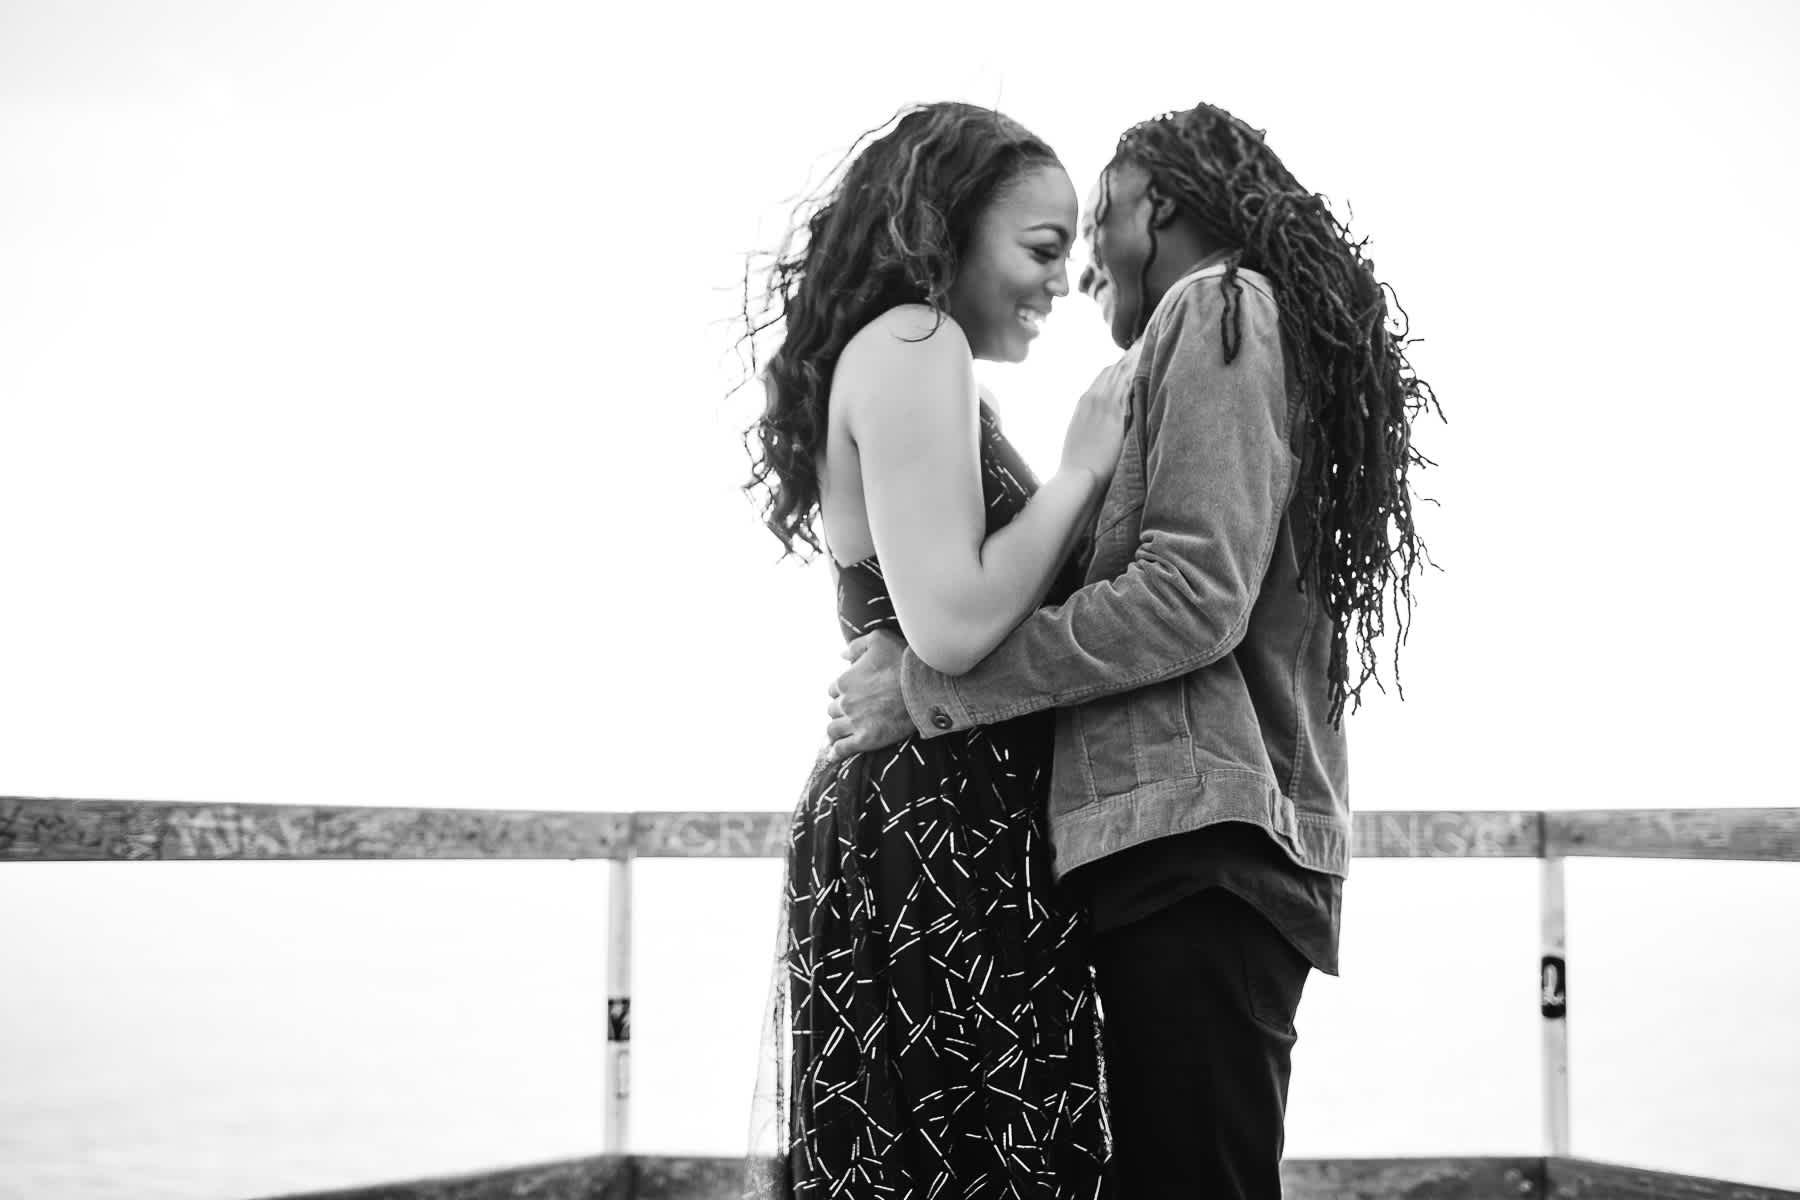 muir-beach-ca-spring-lifestyle-engagement-session-11